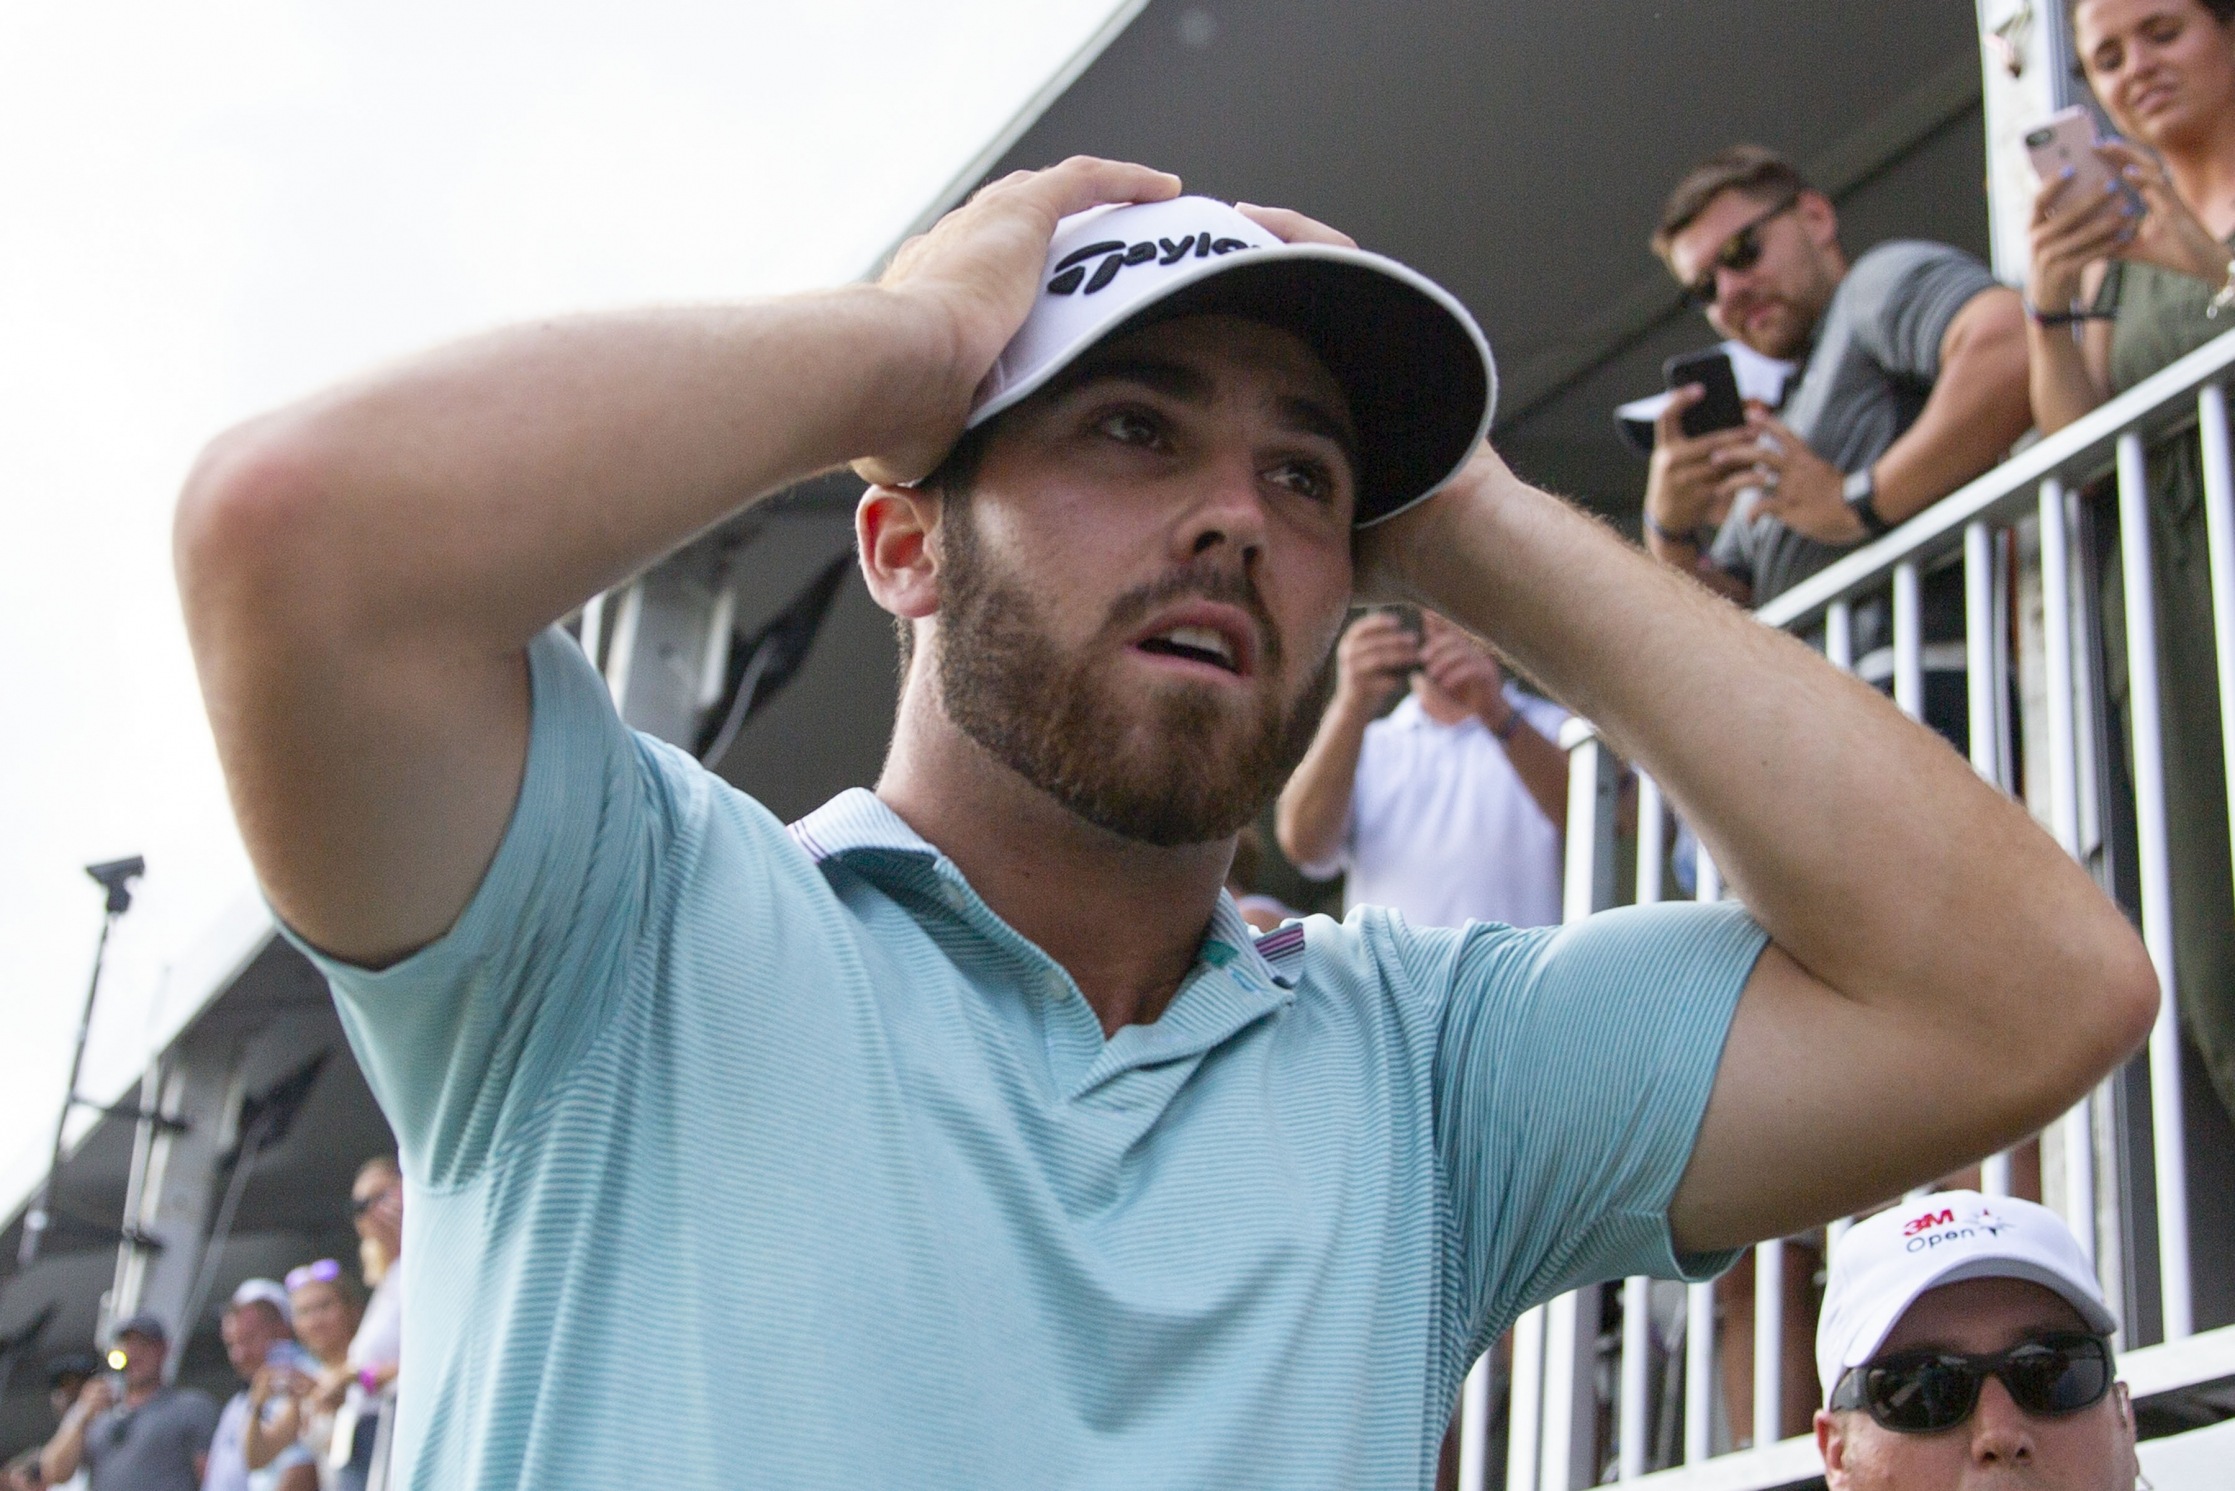 Matthew Wolff holds his head and walks off the course in disbelief after hitting an eagle to win the 3M Open. (Image: Star Tribune)